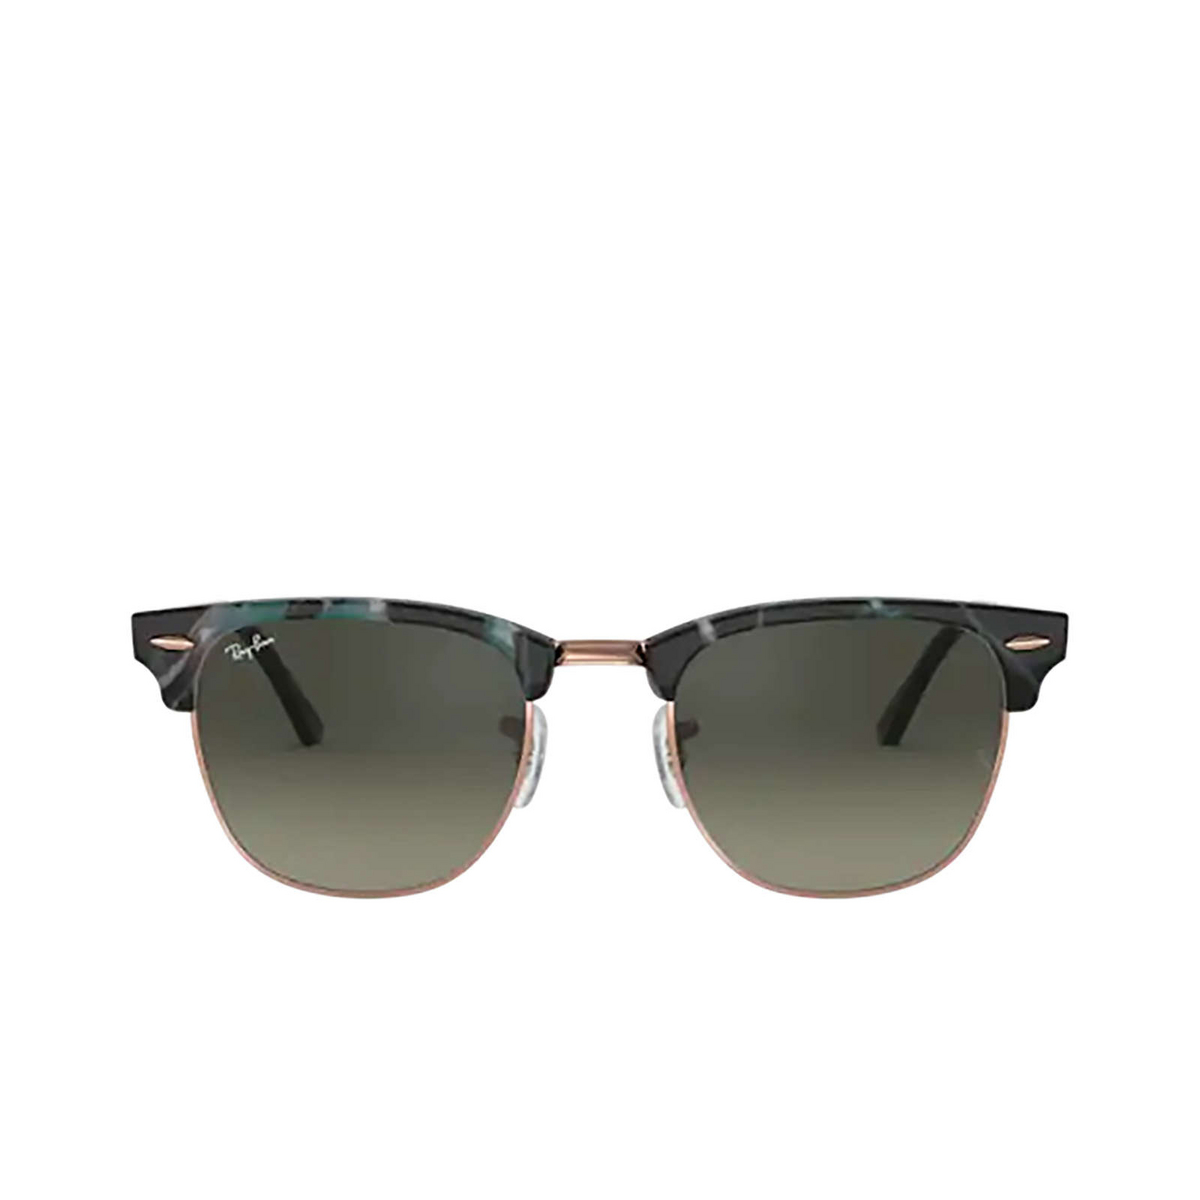 Ray-Ban CLUBMASTER Sunglasses 125571 Spotted Grey / Green - front view